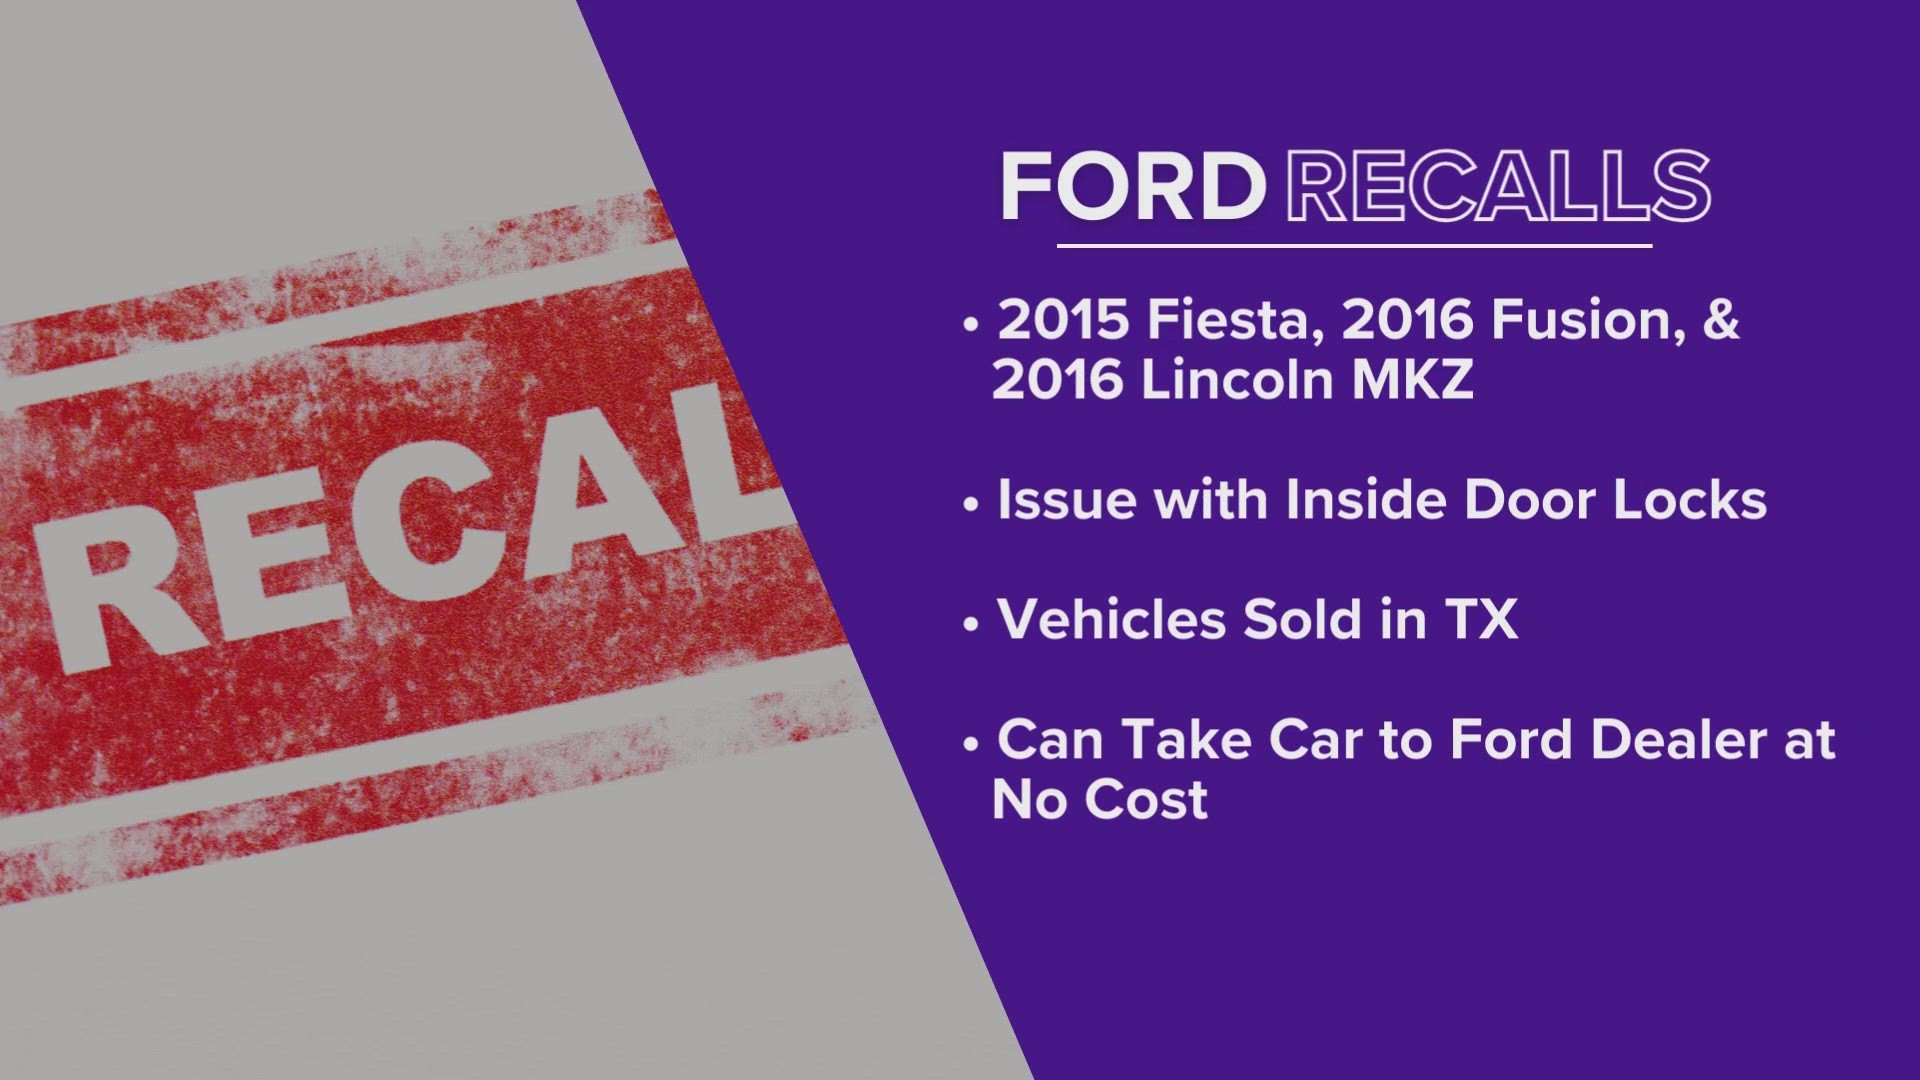 The recall includes 2015 Ford Fiesta, 2016 Ford Fusion and 2016 Lincoln MKZ vehicles.